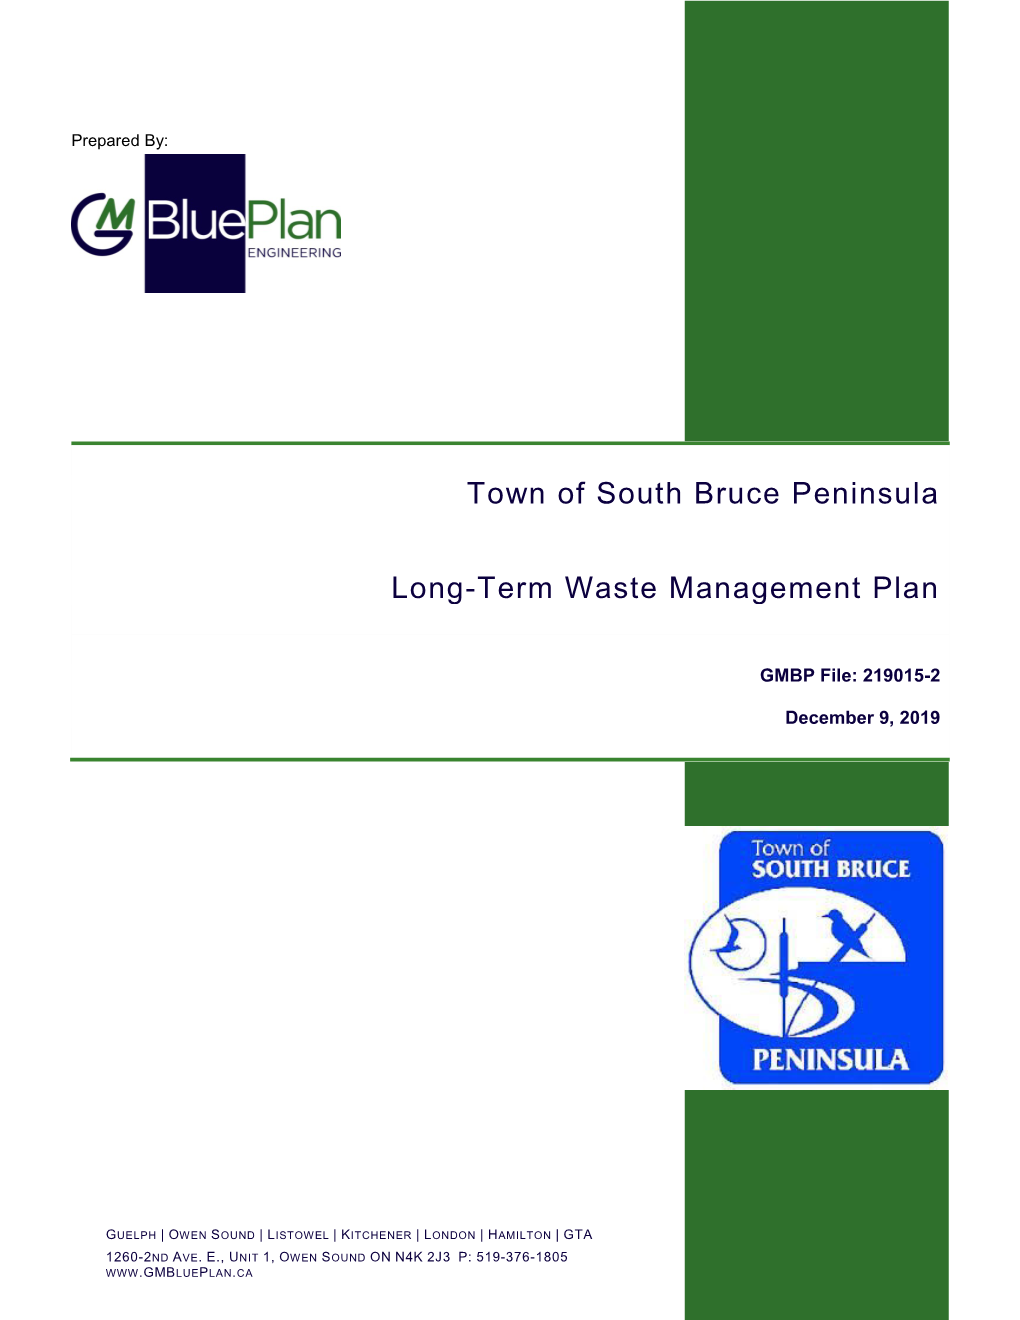 Town of South Bruce Peninsula Long-Term Waste Management Plan Gmbp File: 219015-2 December 9, 2019